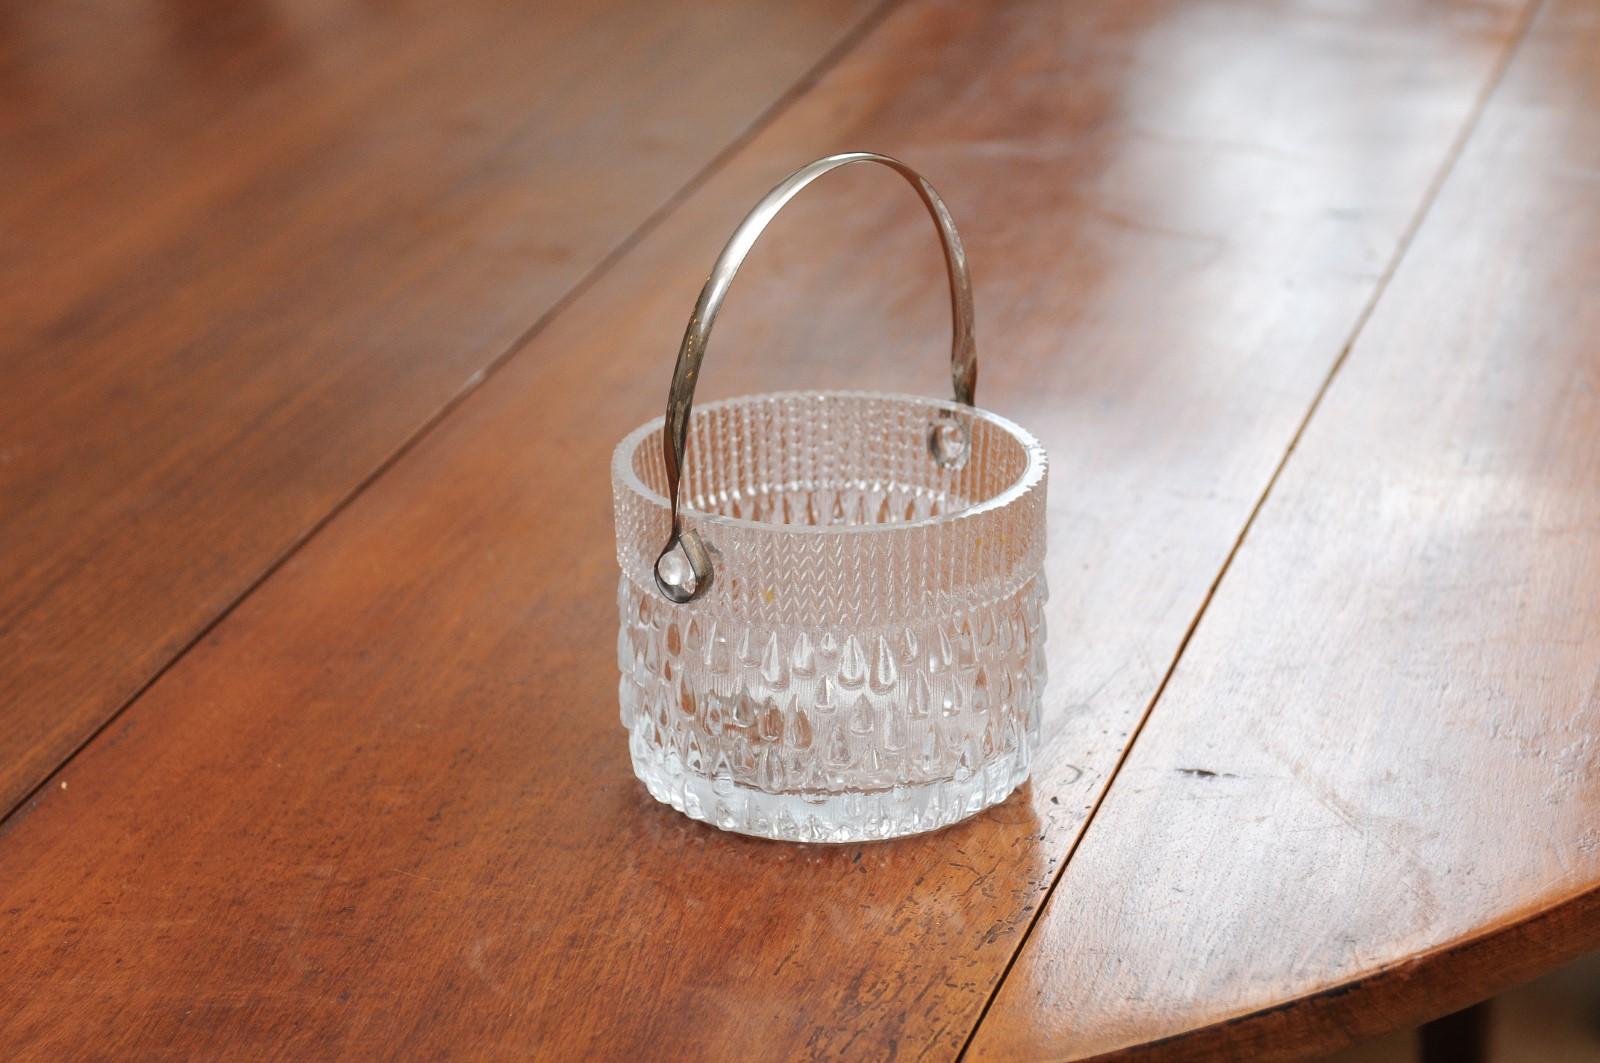 An English cut glass ice bucket from the 20th century, with silver spoon, large handle and teardrop motifs. Created in England during the 20th century, this cut glass ice bucket features a circular shape harmoniously accented with teardrop motifs.